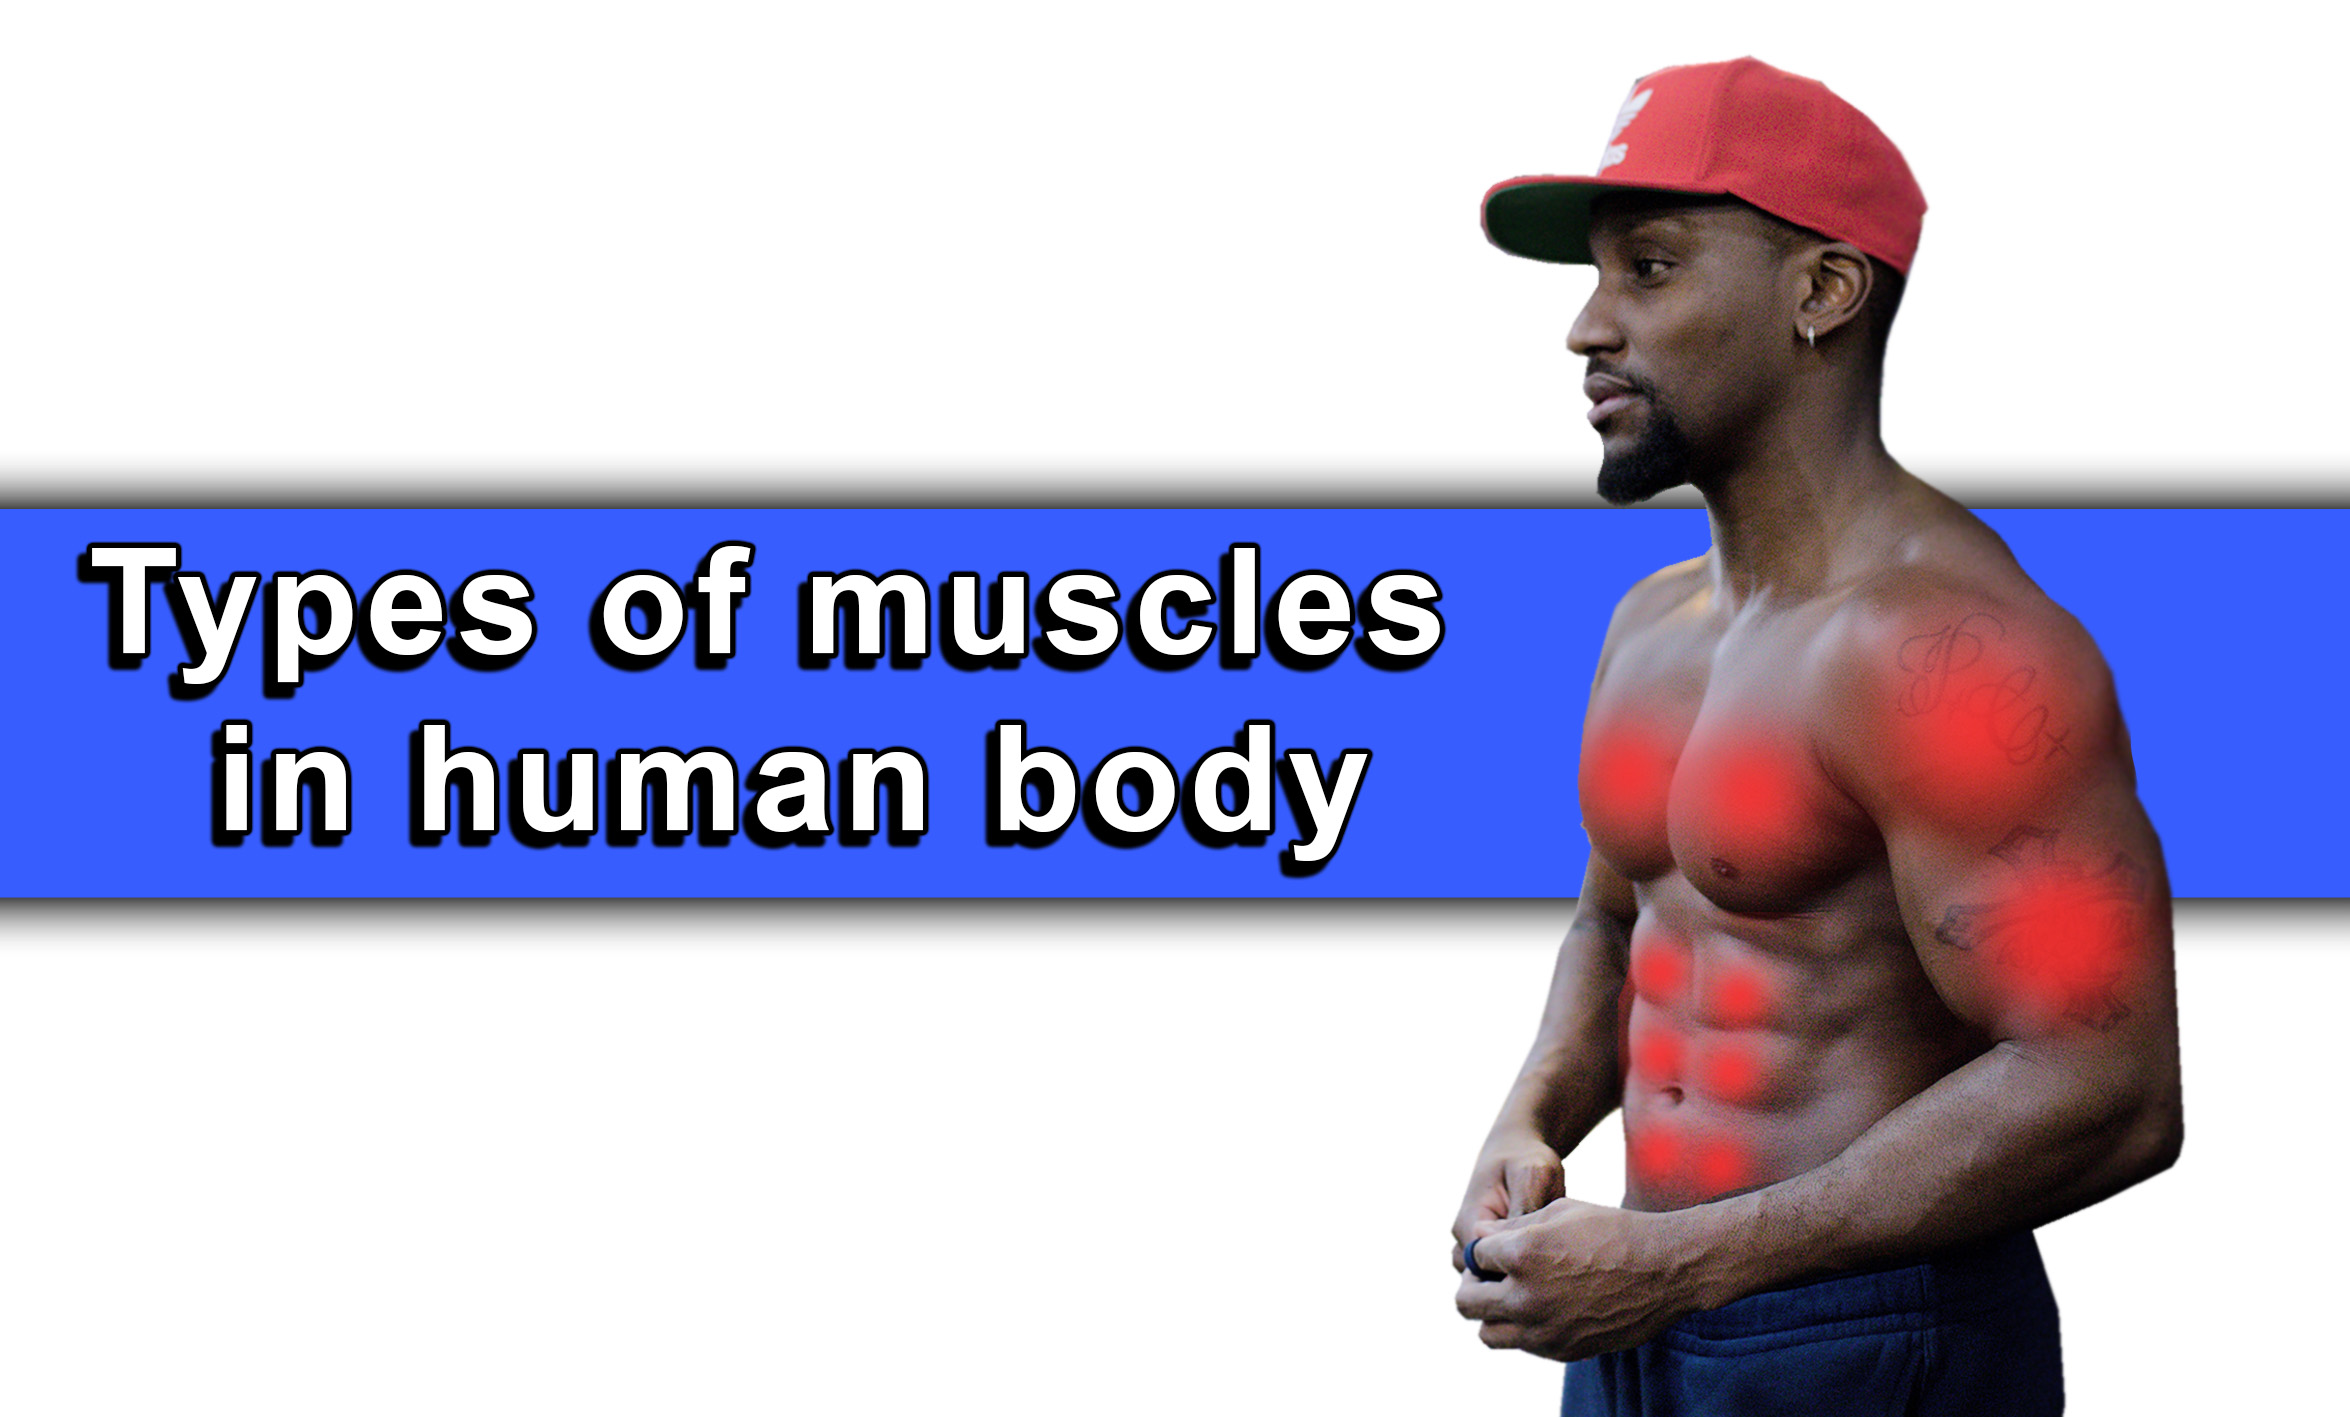 Types of muscles in human body